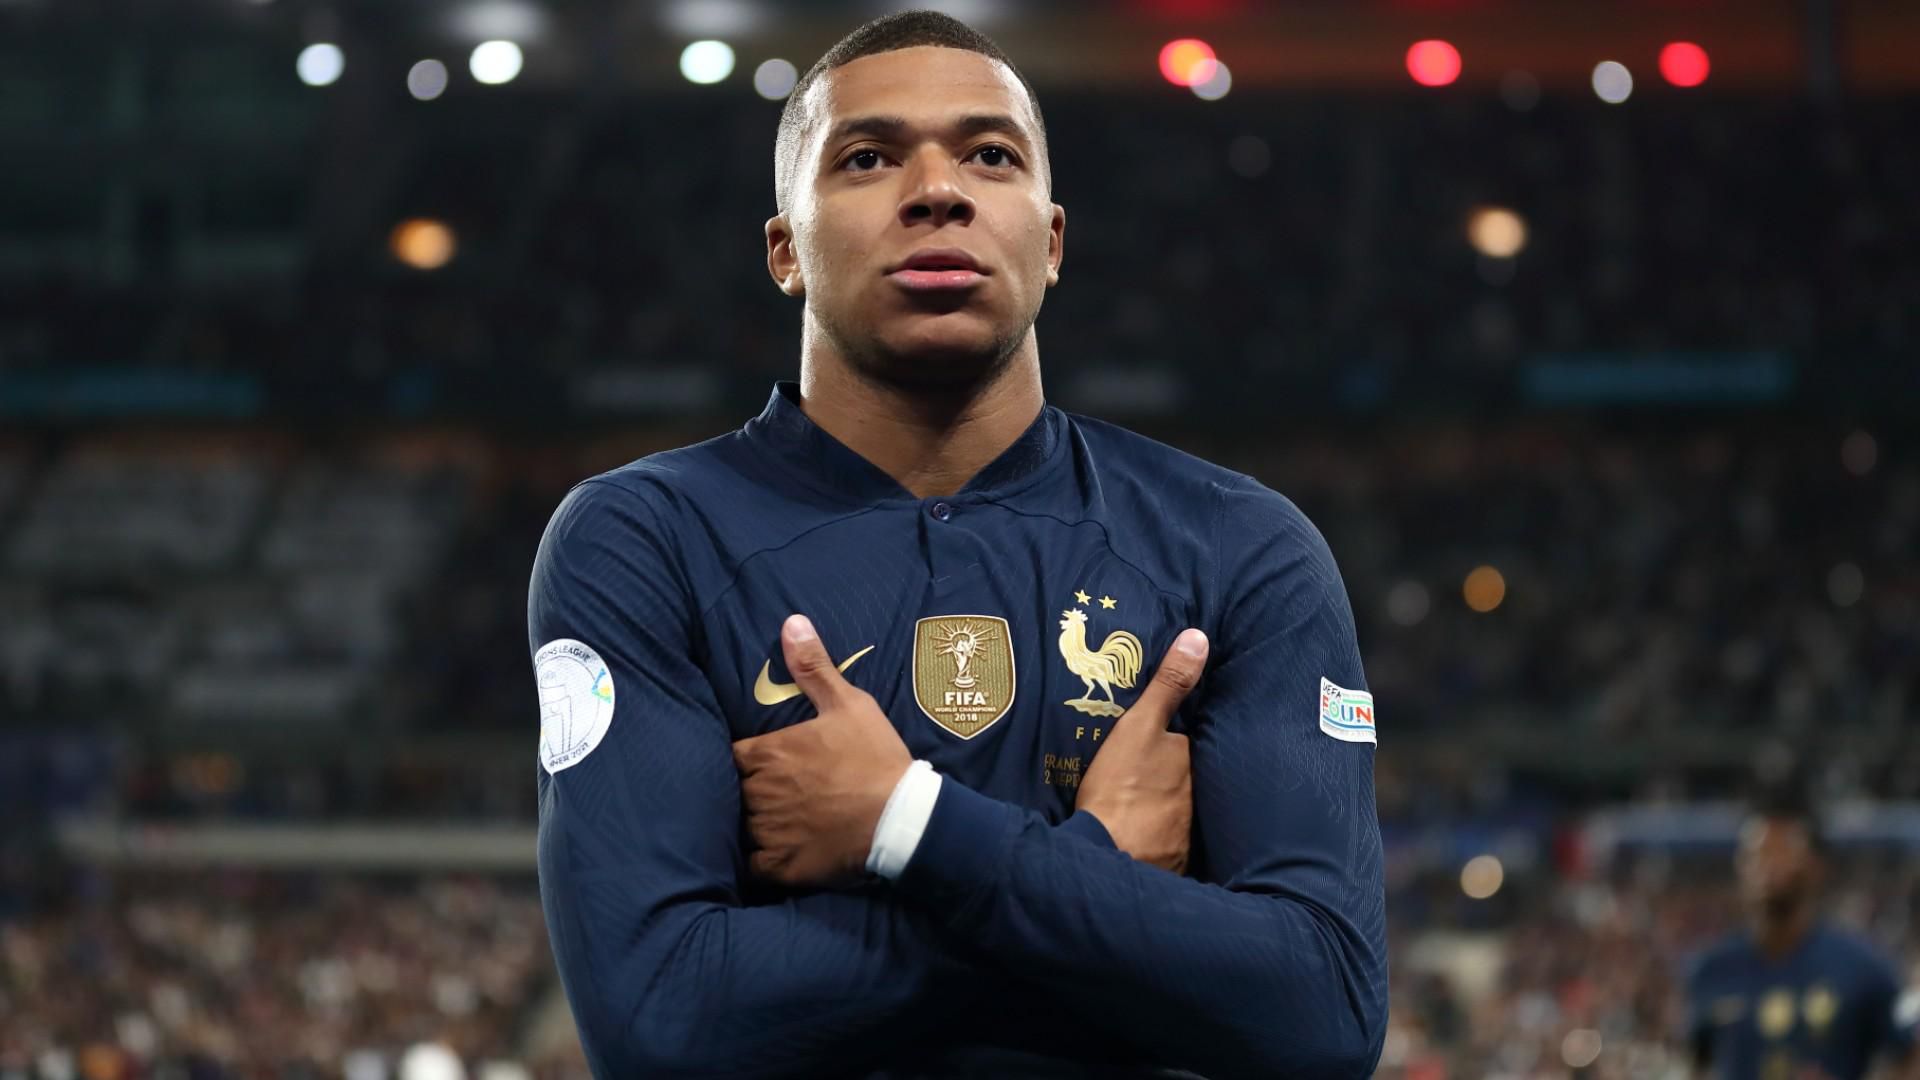 Kylian Mbappe has been the driving force for France at the Qatar 2022 World Cup